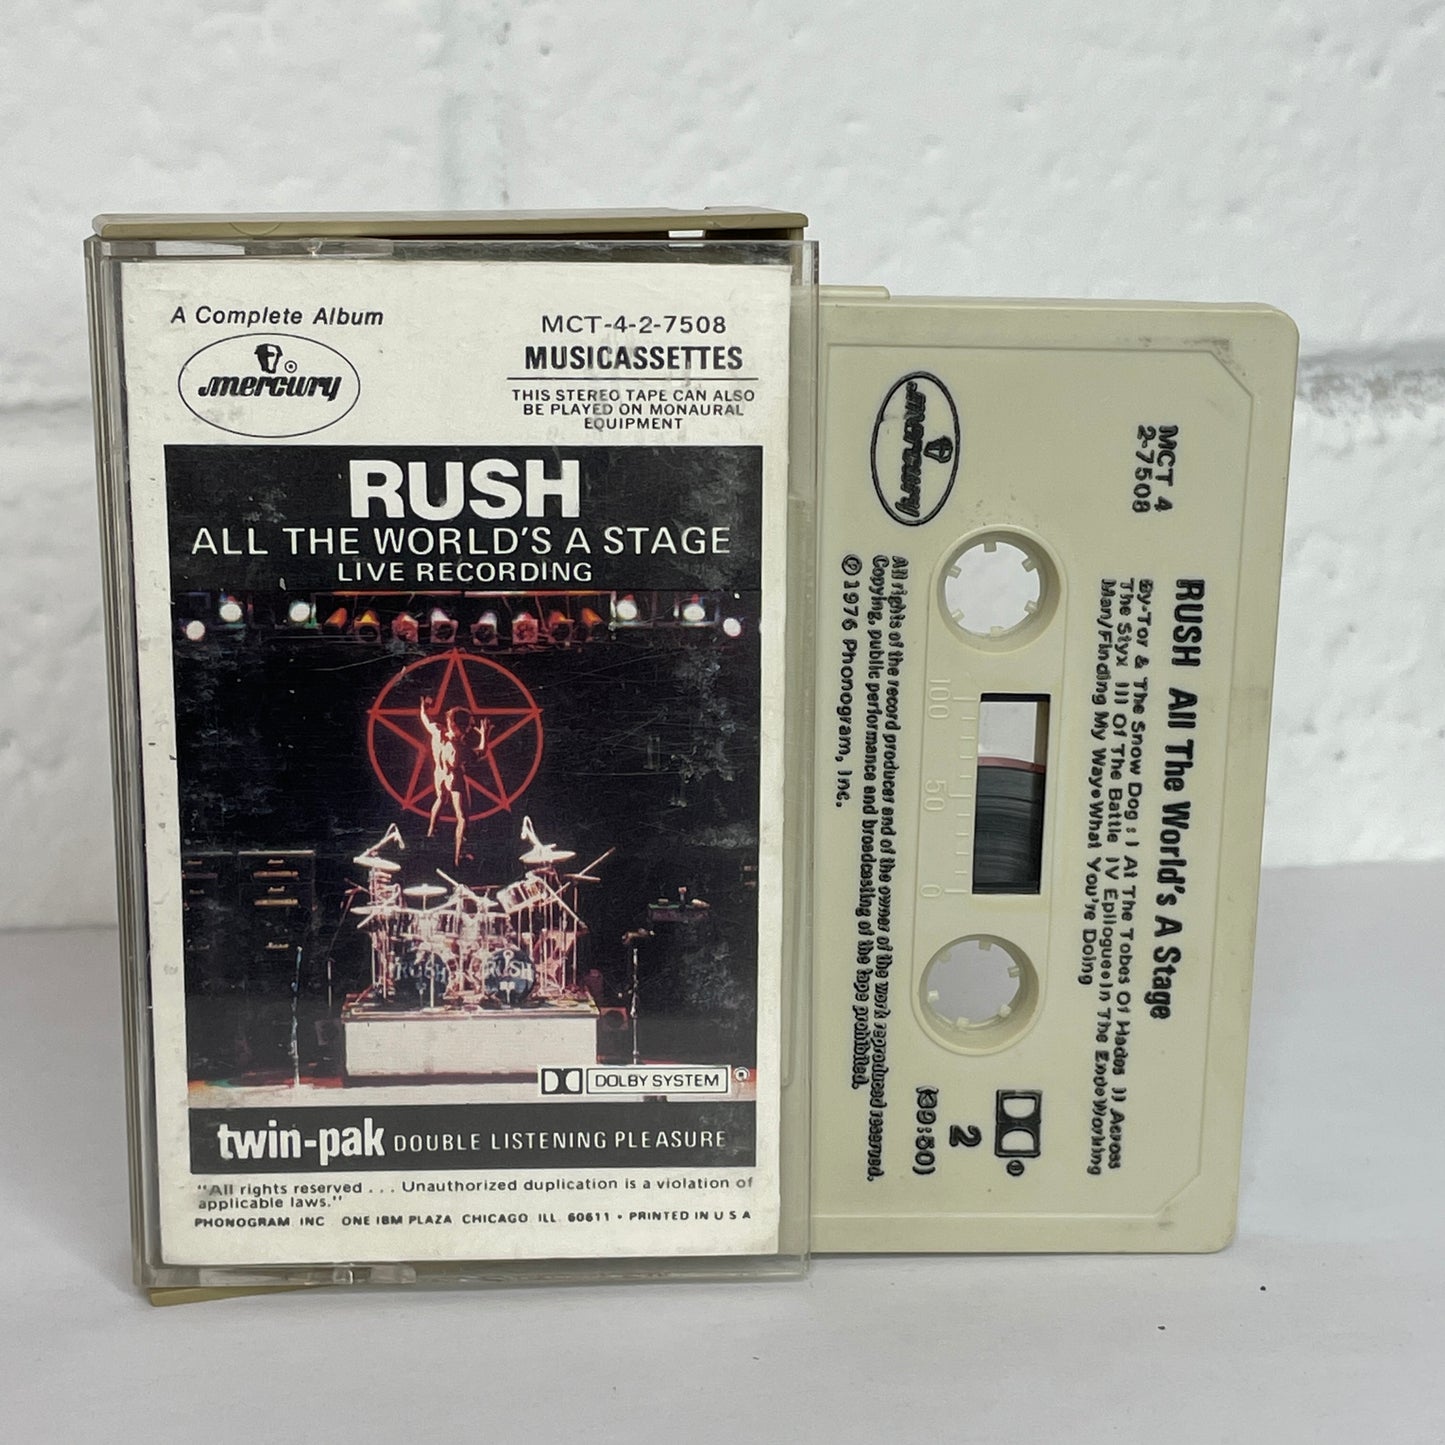 Rush - All the World's a Stage Live Recording original cassette tape